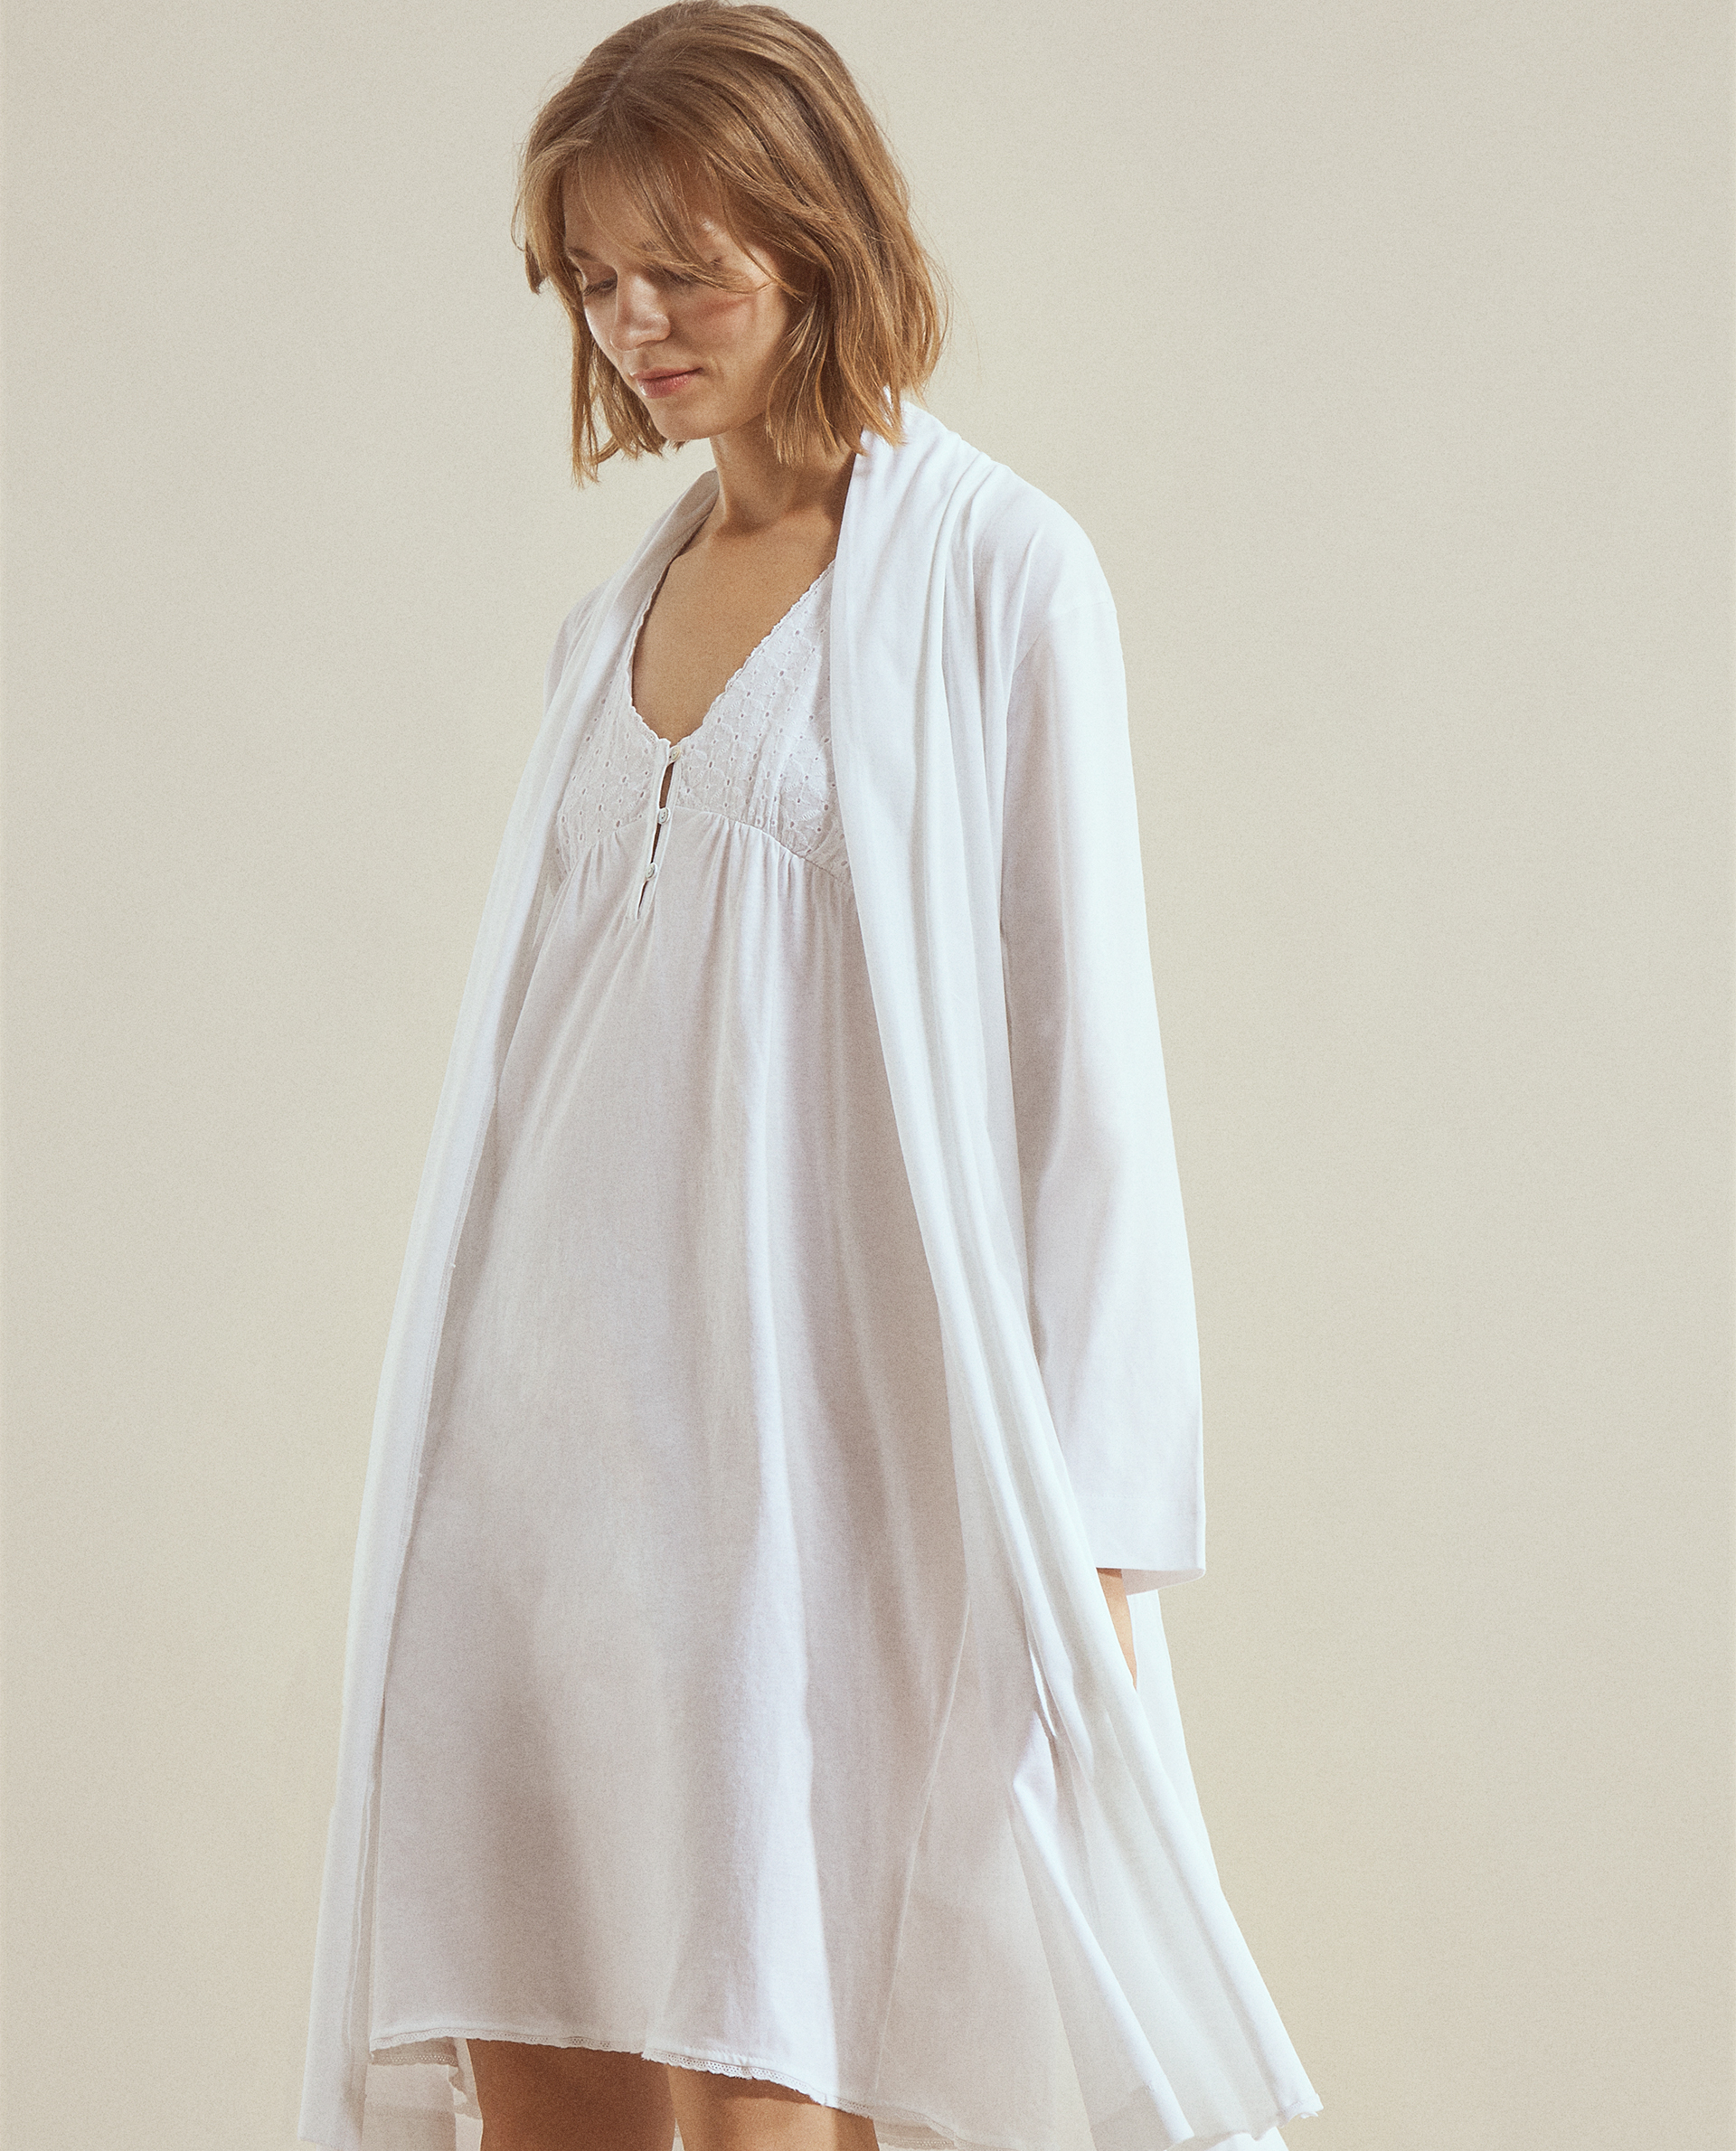 WHITE DRESSING GOWN - Woman - CLOTHING 